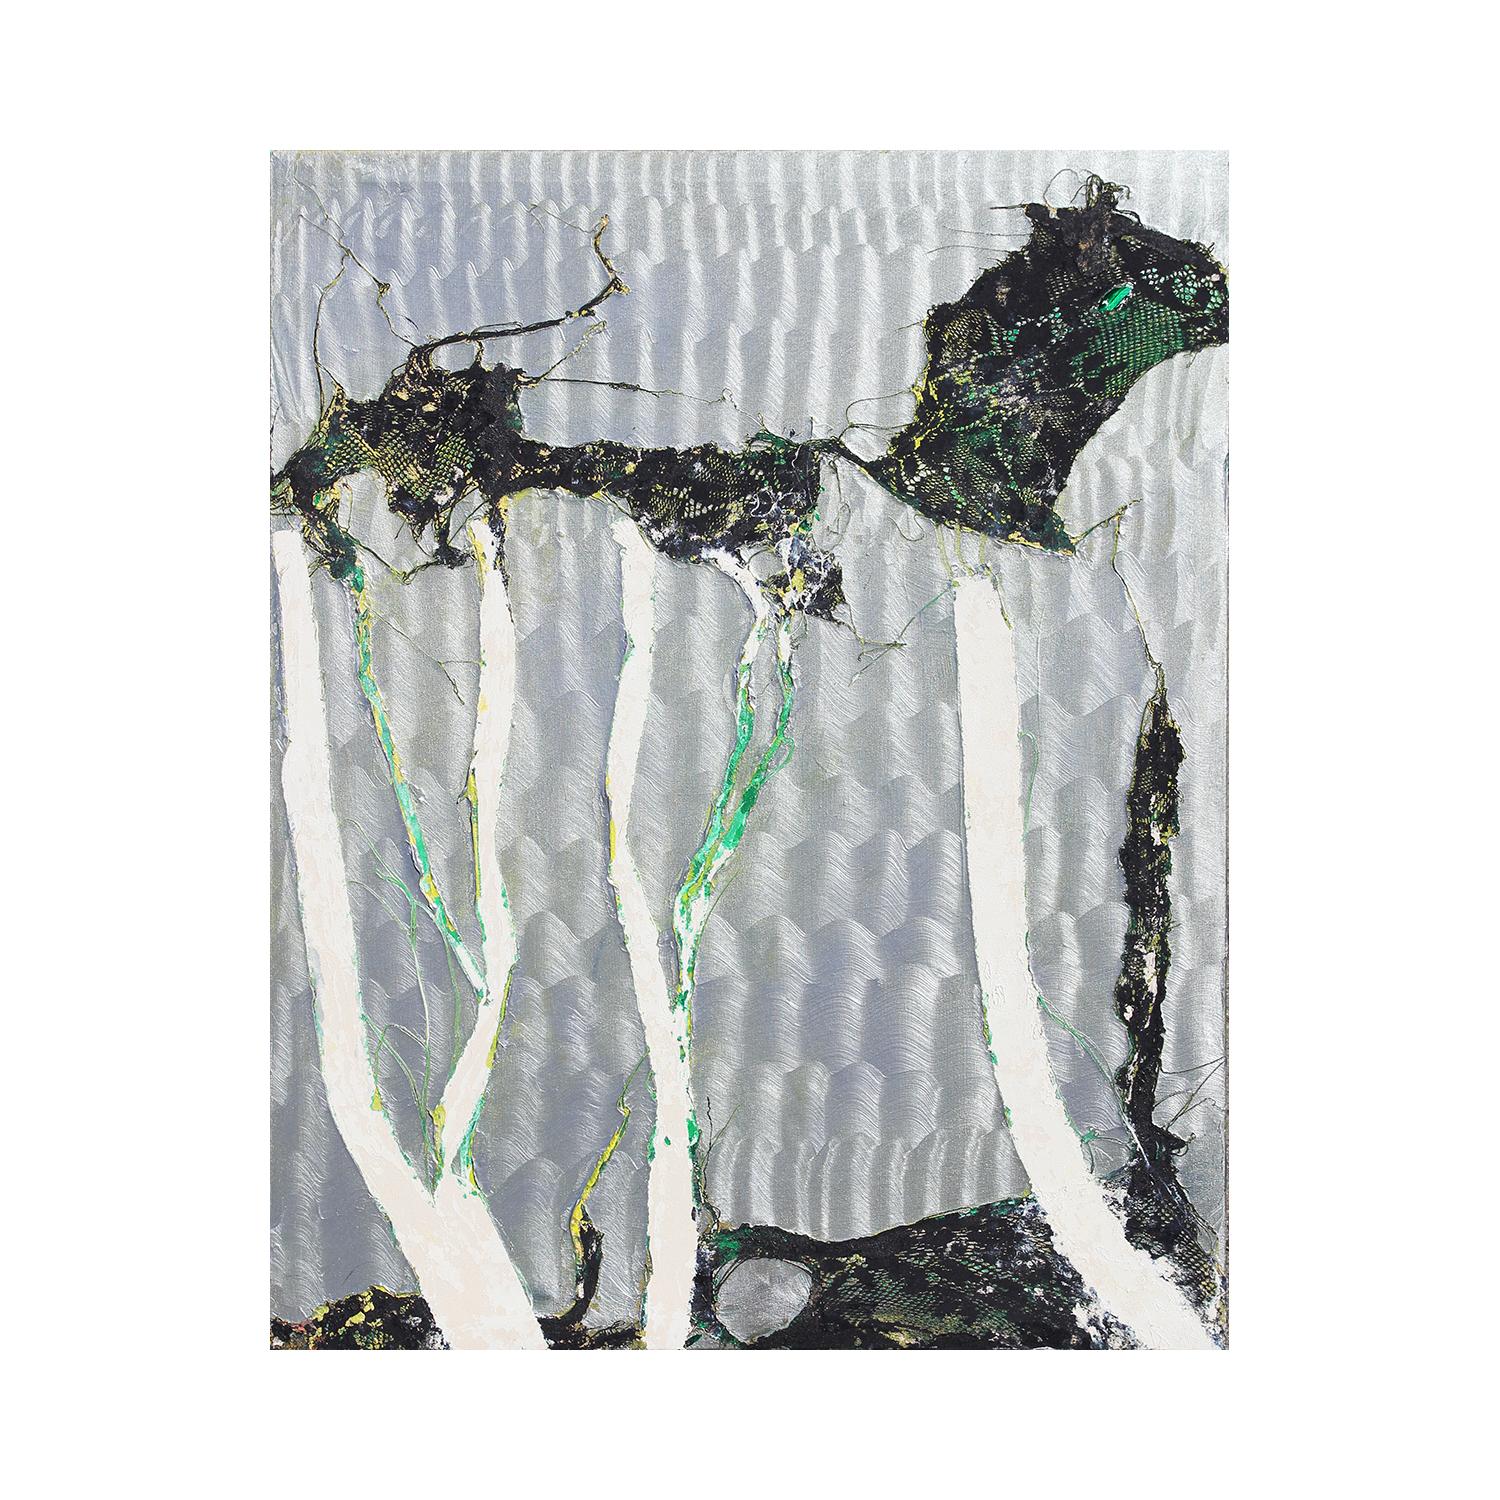 “Alamo Square” Modern Silver, Black, & Green Abstract Landscape Lace Painting - Gray Abstract Painting by Mark Flood